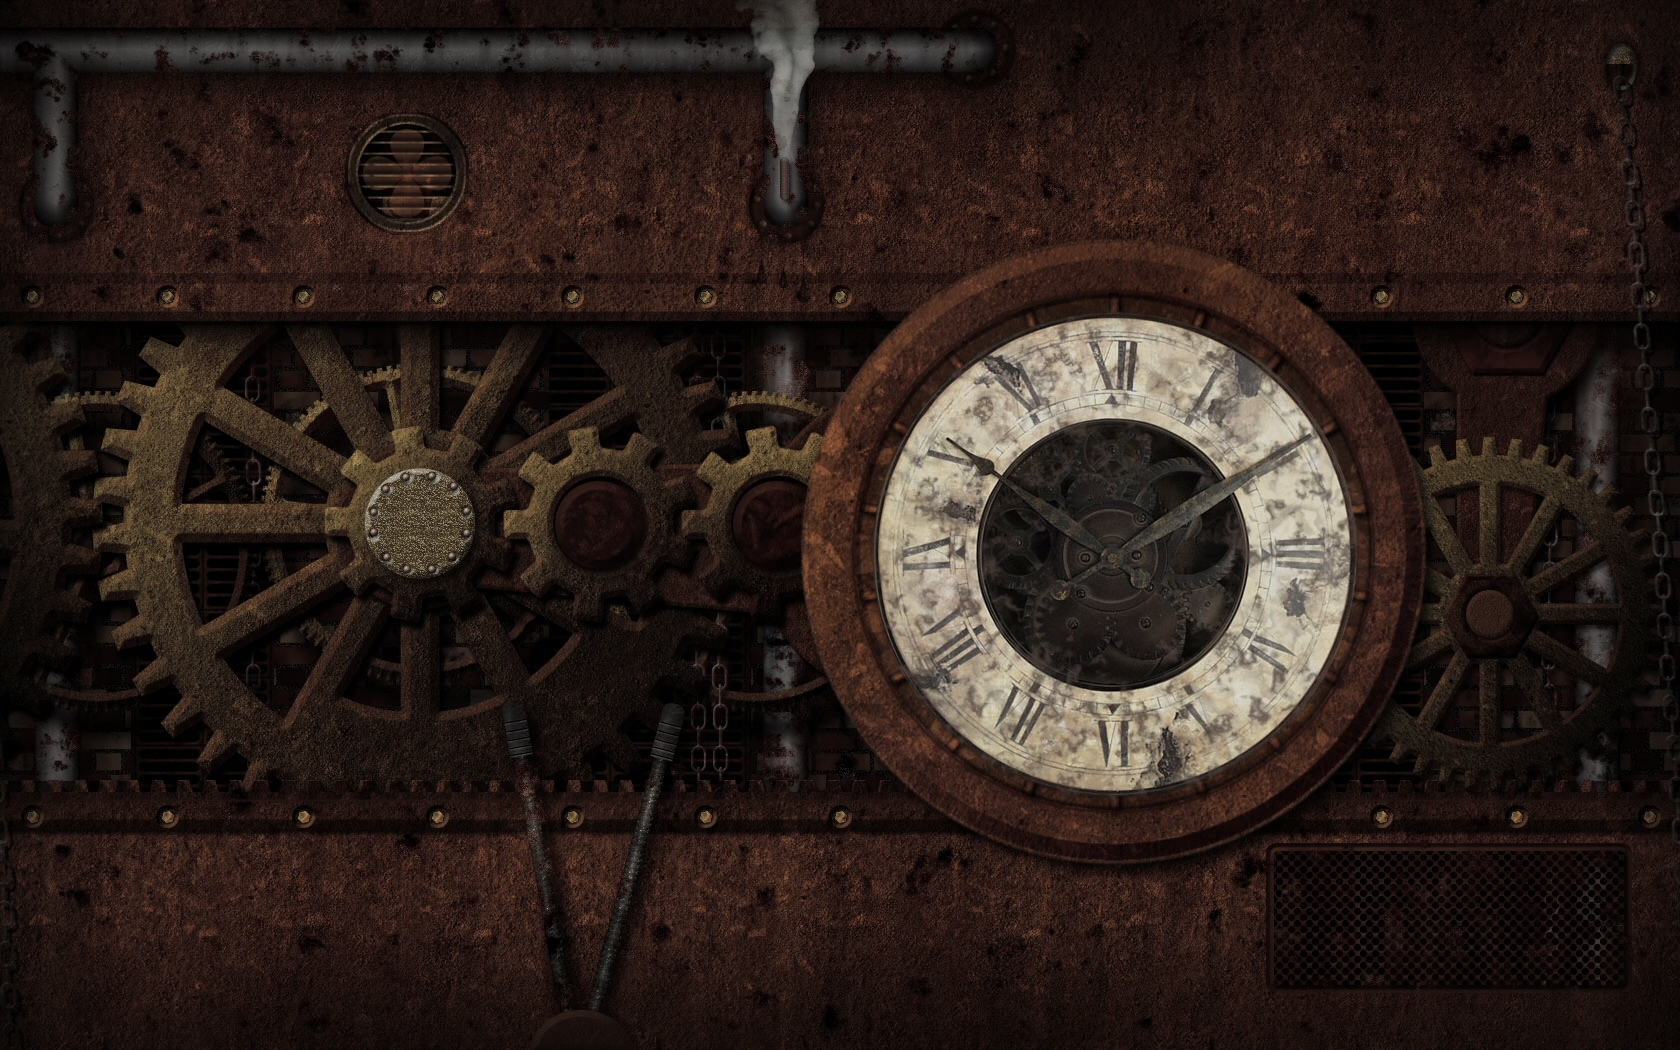 Animated Steampunk Wallpaper